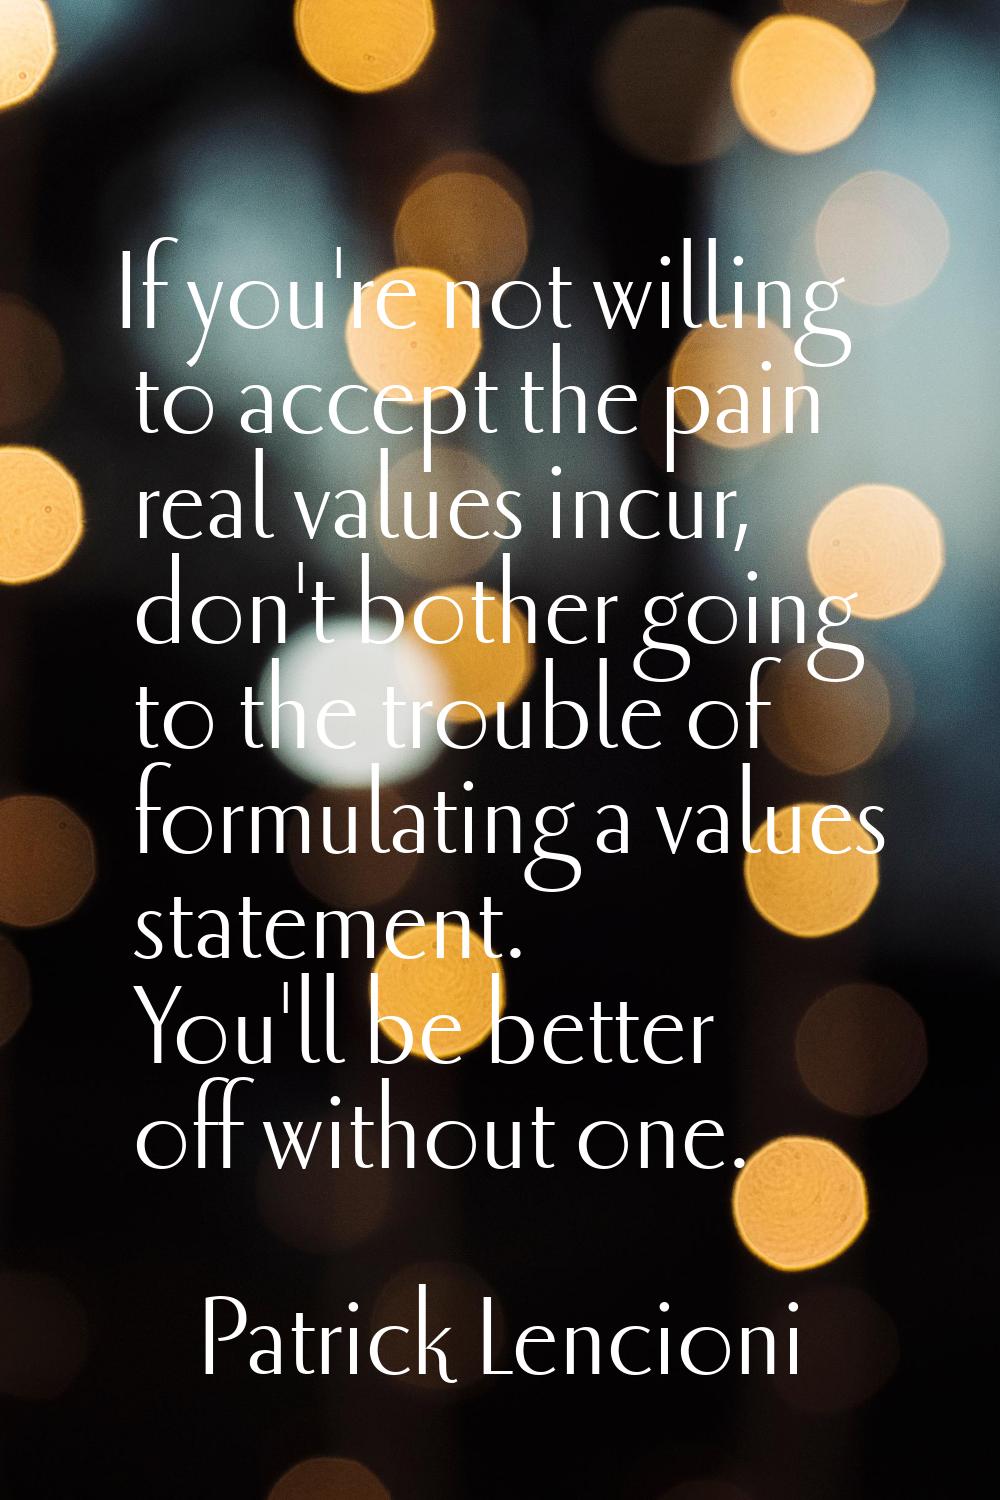 If you're not willing to accept the pain real values incur, don't bother going to the trouble of fo